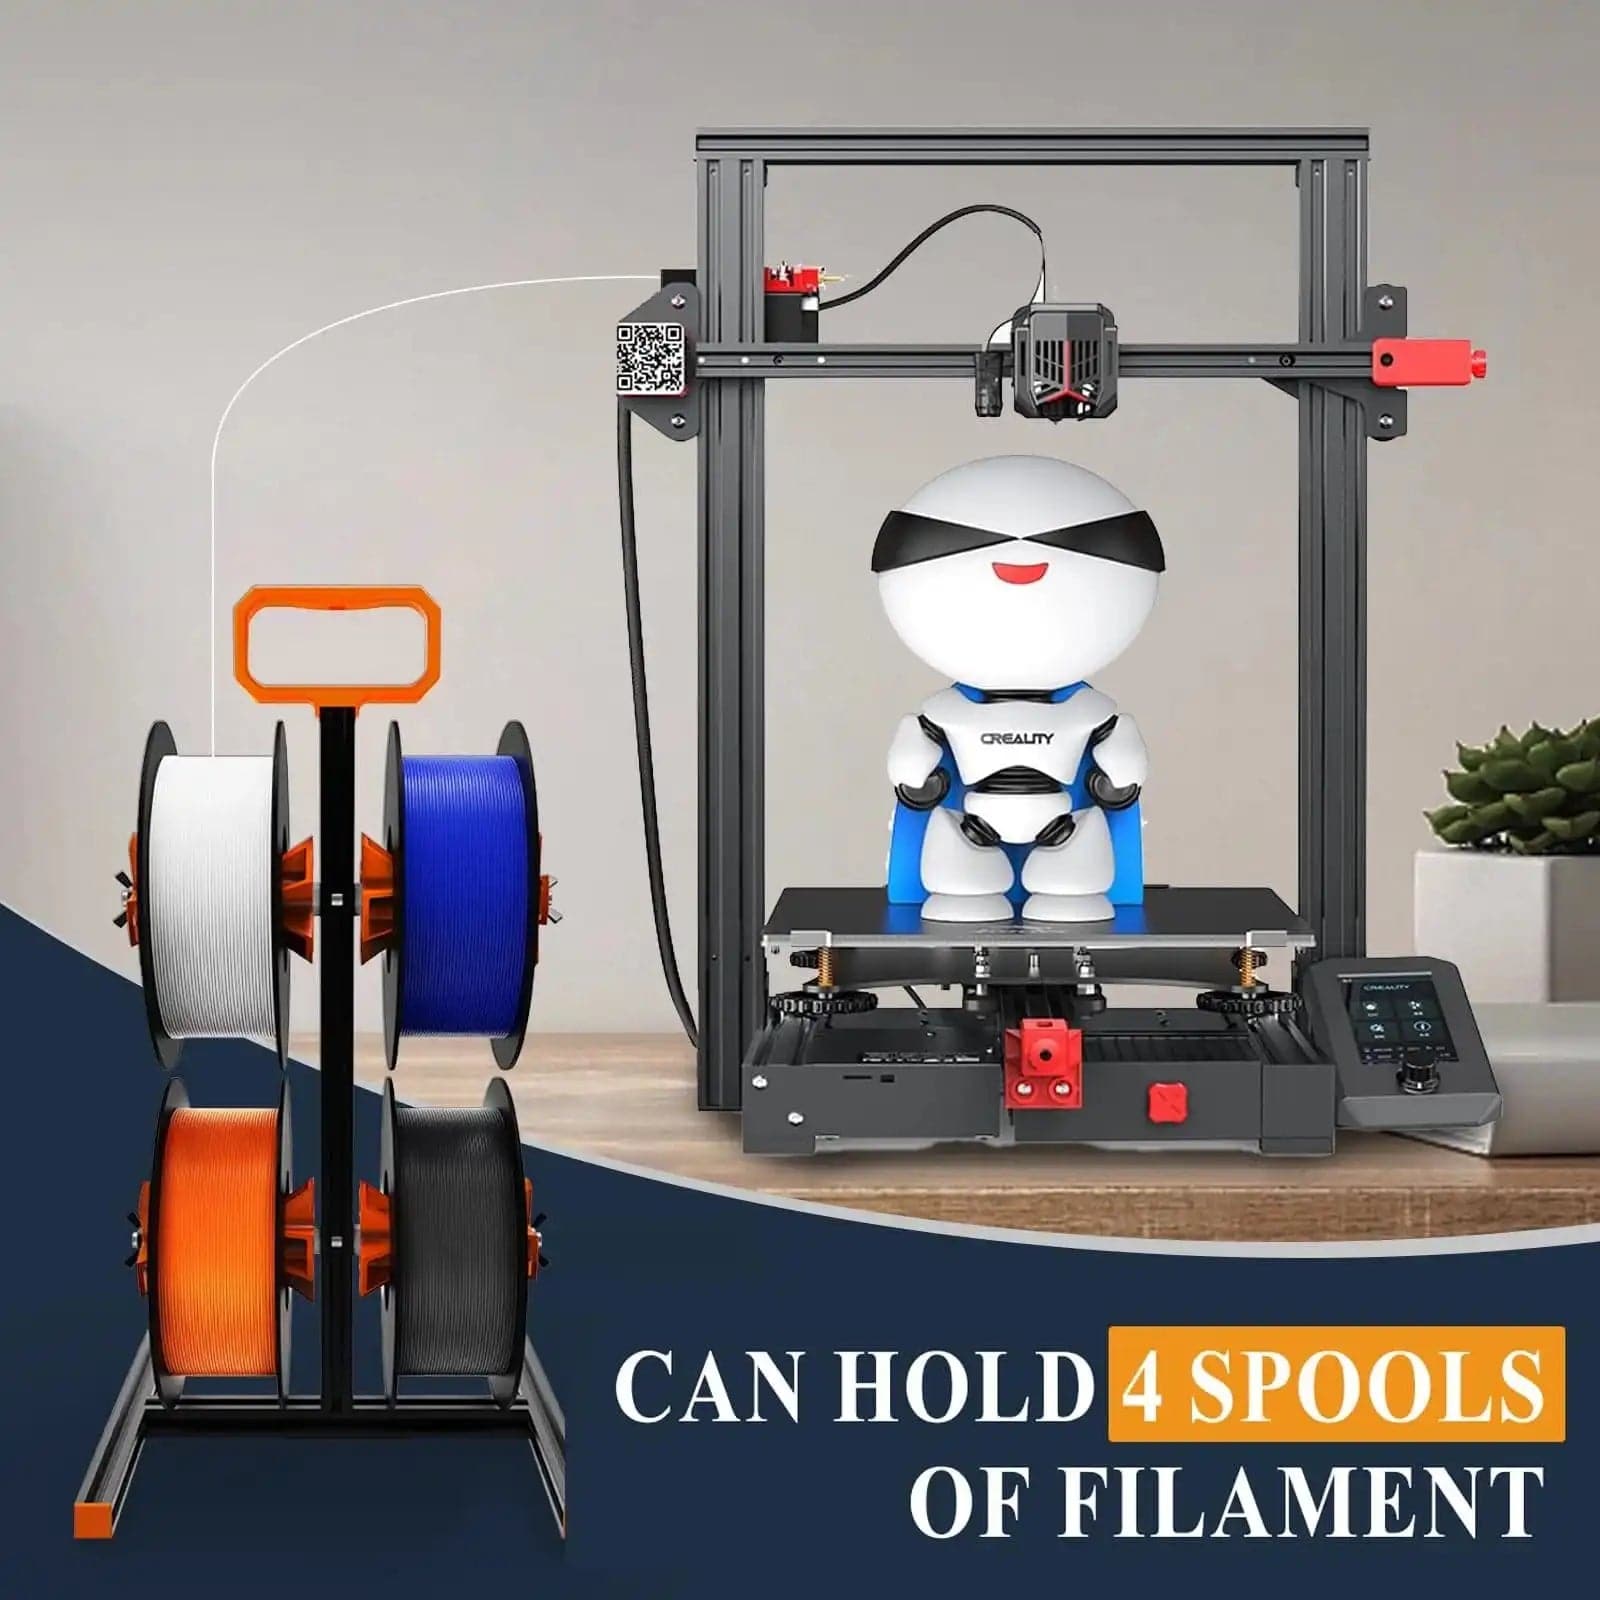 YOOPAI Filament Spool Holder for 4 Spools FilamentFeatures:

【Ship From Amazon FBA Warehouse】Same shipping service with Amazon. Enjoy reliable performance and fast shipping with Amazon.
【Innovative Design】The spool YOOPAI Filament Spool Holder3D Printer Accessories